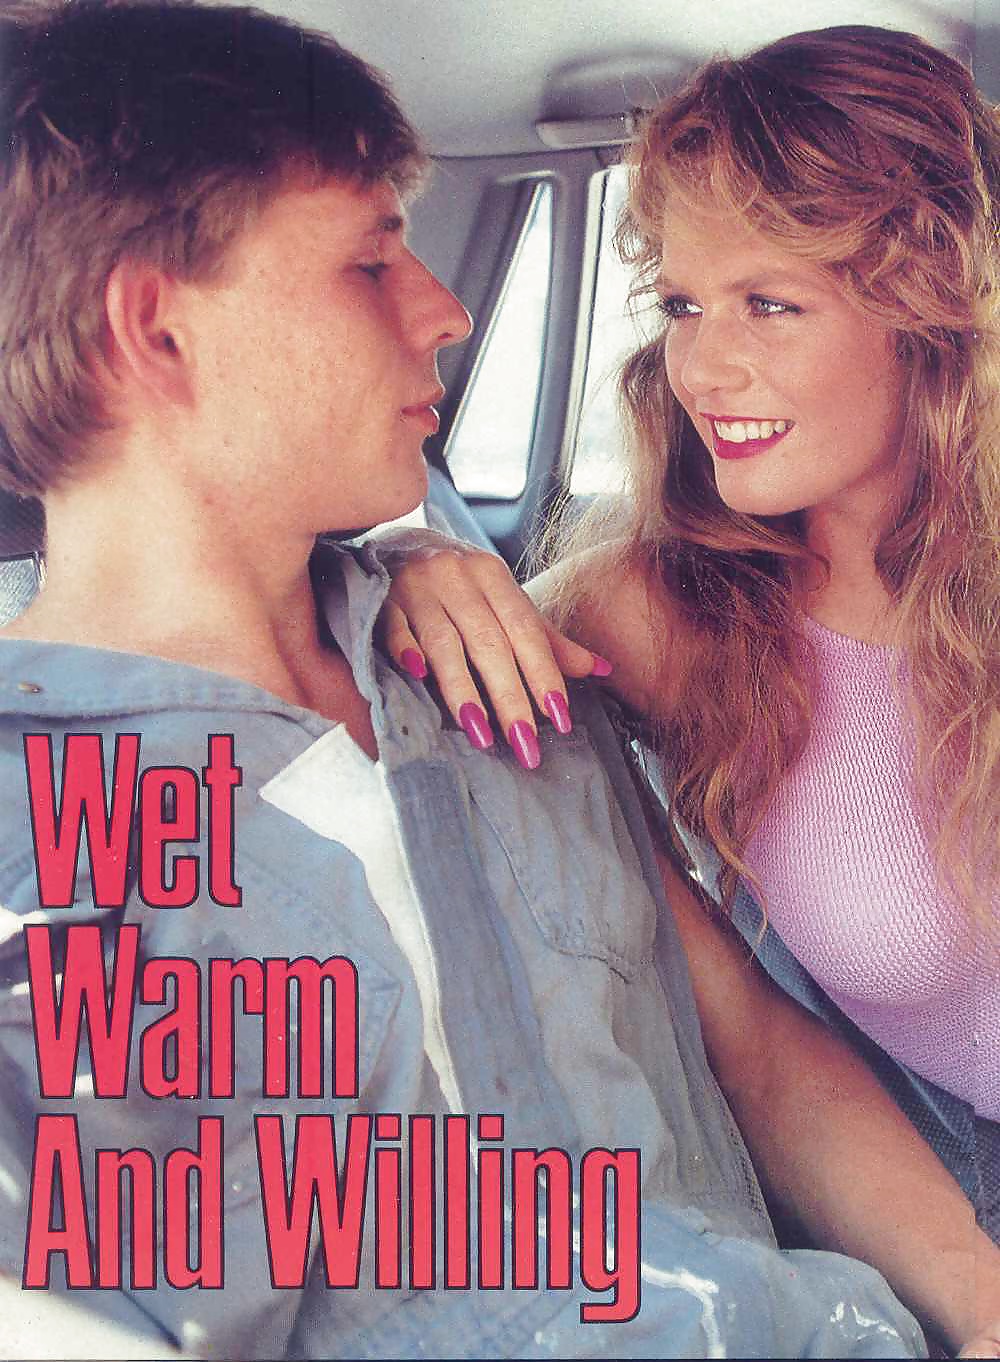 Classic magazine #31 - wet warm and willing Vintage porn! #24571772